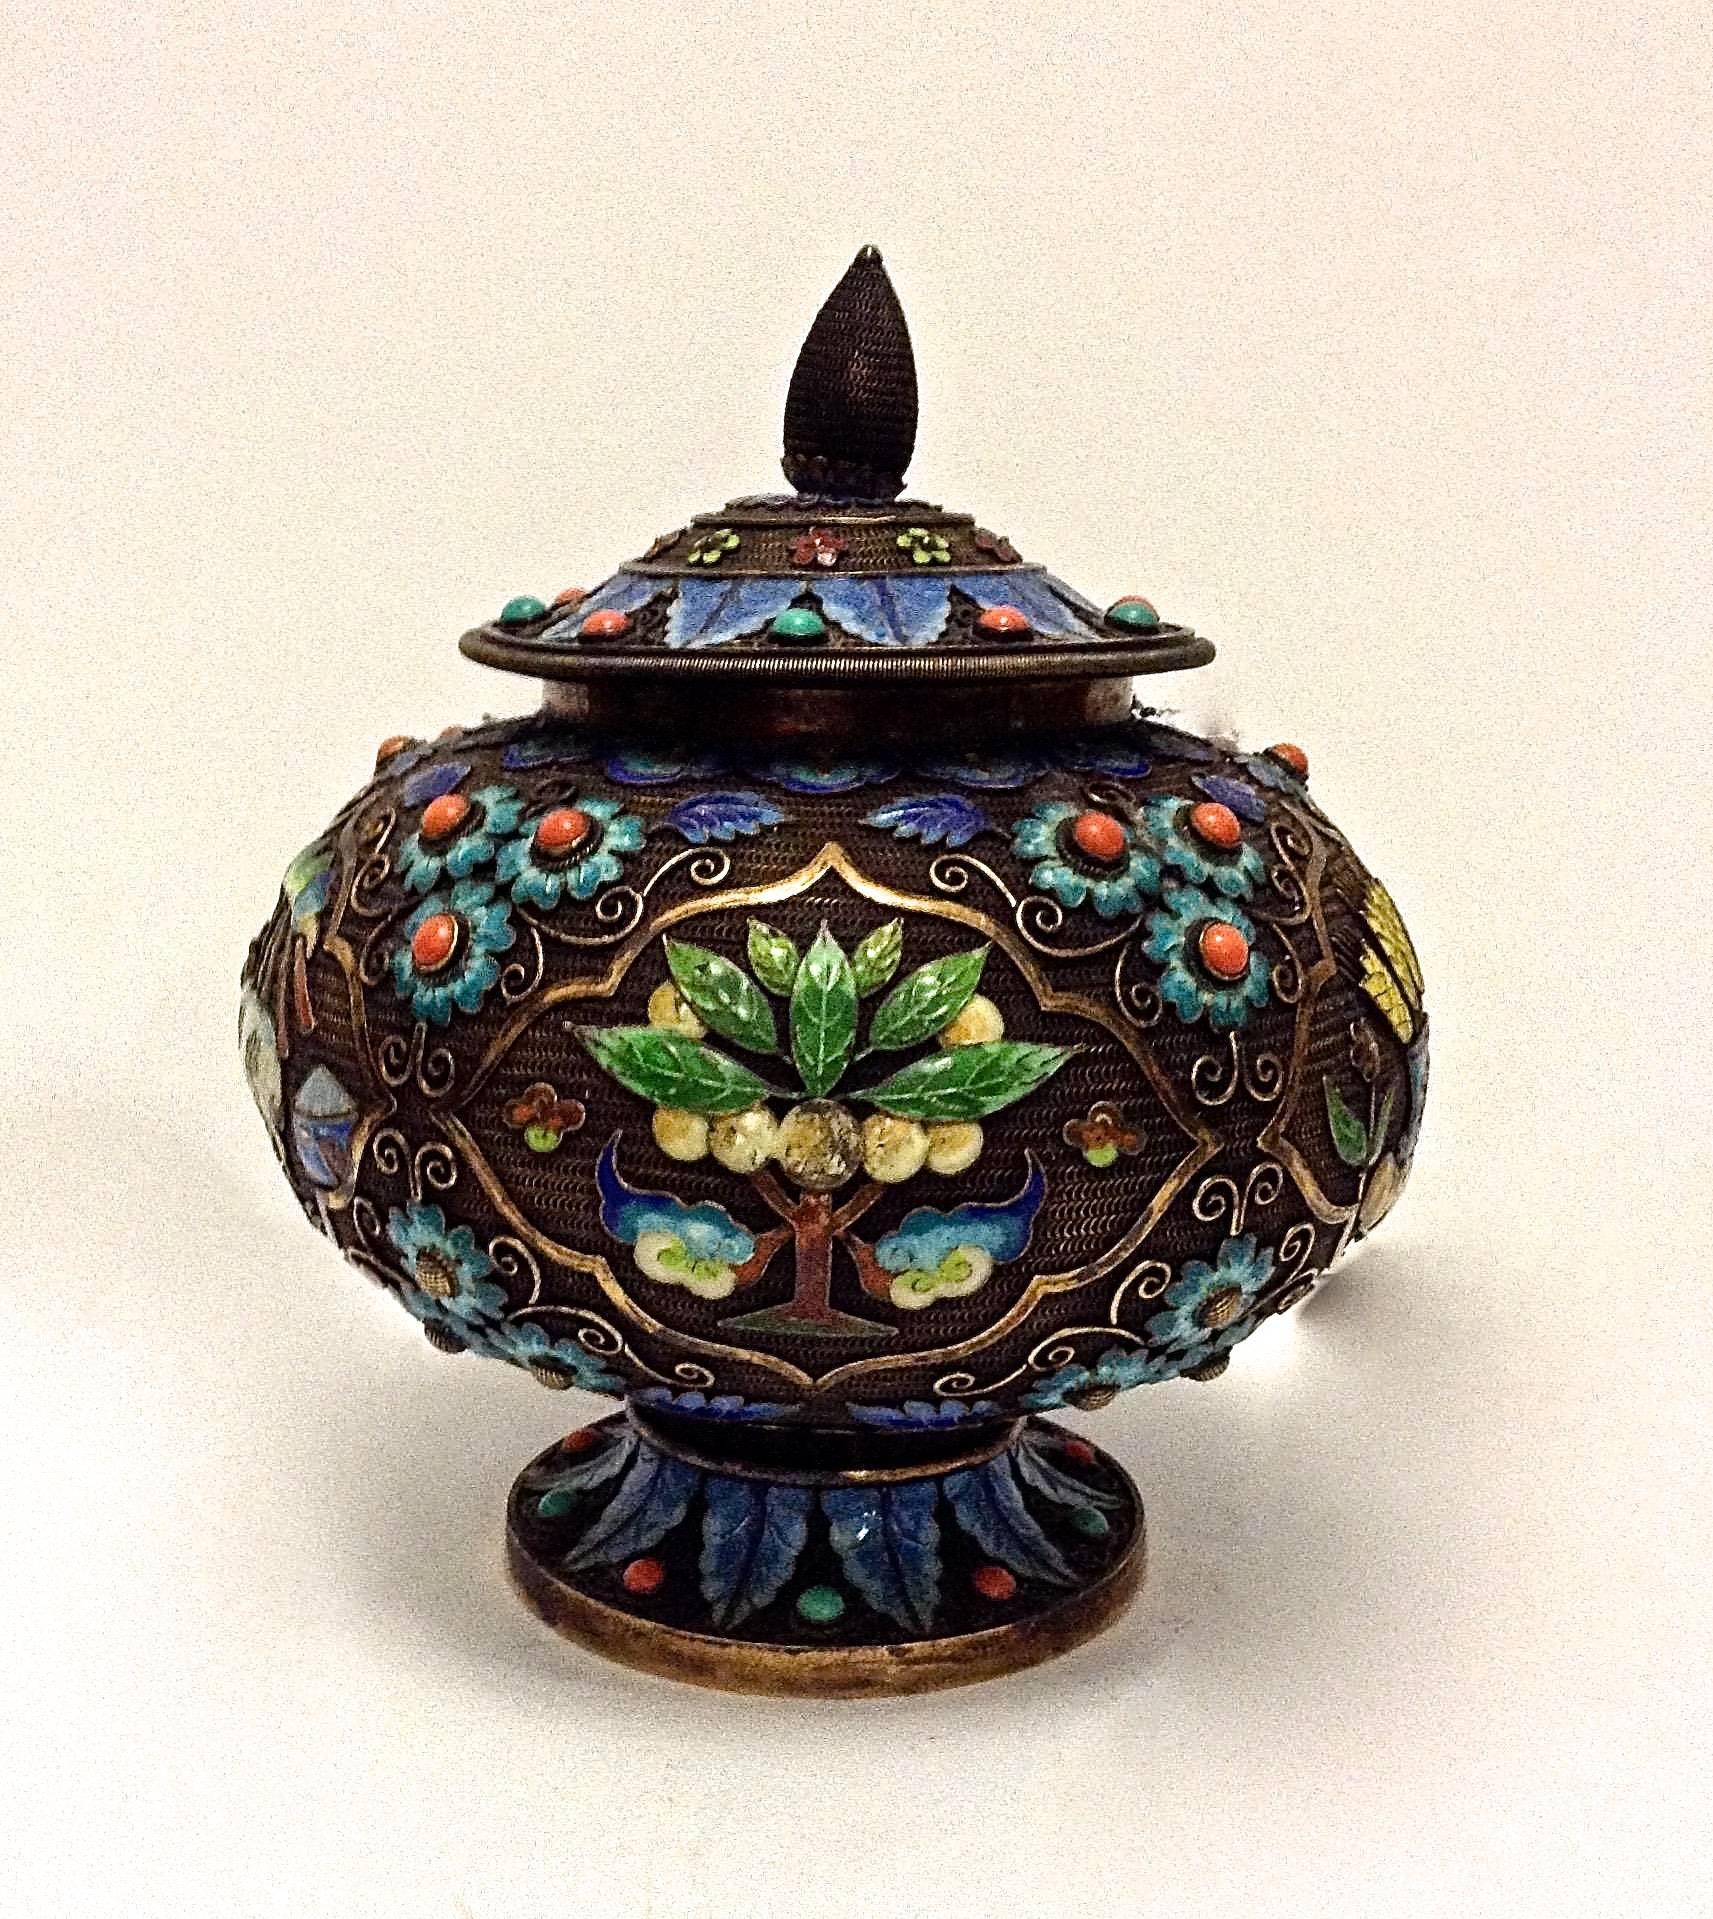 A Chinese export gilt-silver and enamel box with a blue floral and leaf radial design on the lid. It is of a bulbous shape that features four framed enamel 'scenes' within it, including: vegetables with wheat in a vase/shield with a red triple cross